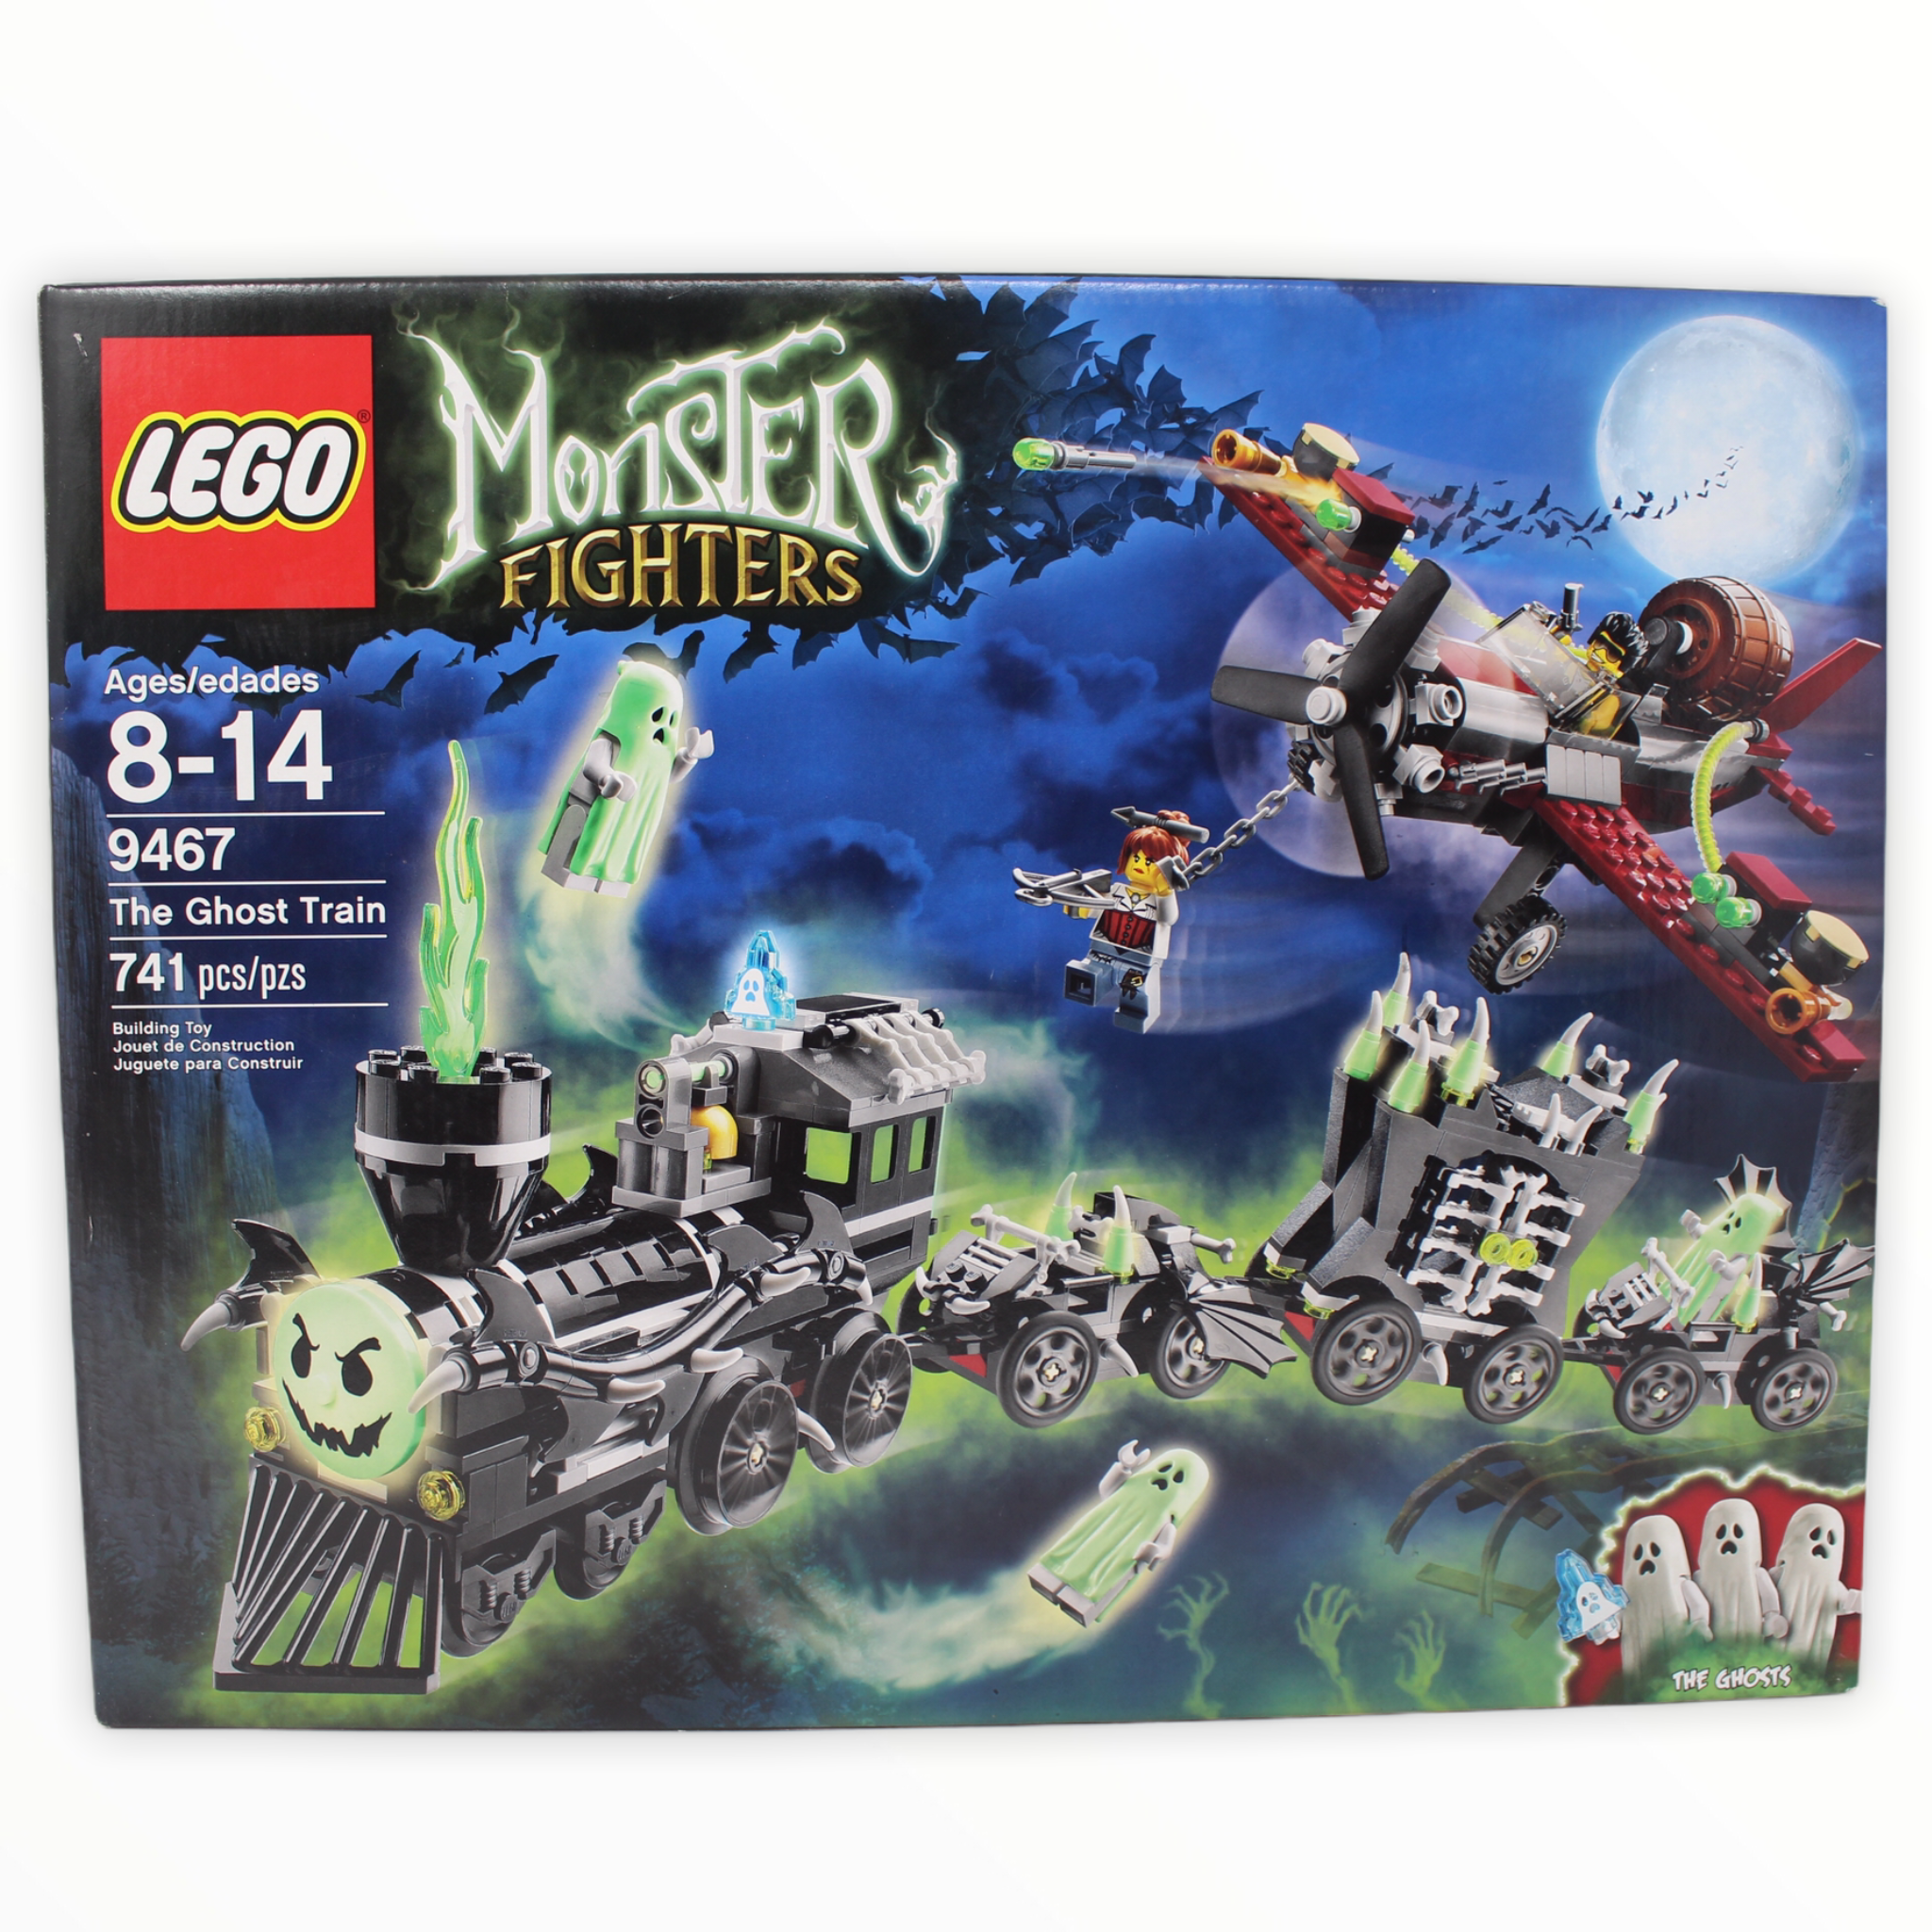 Retired Set 9467 Monster Fighters The Ghost Train